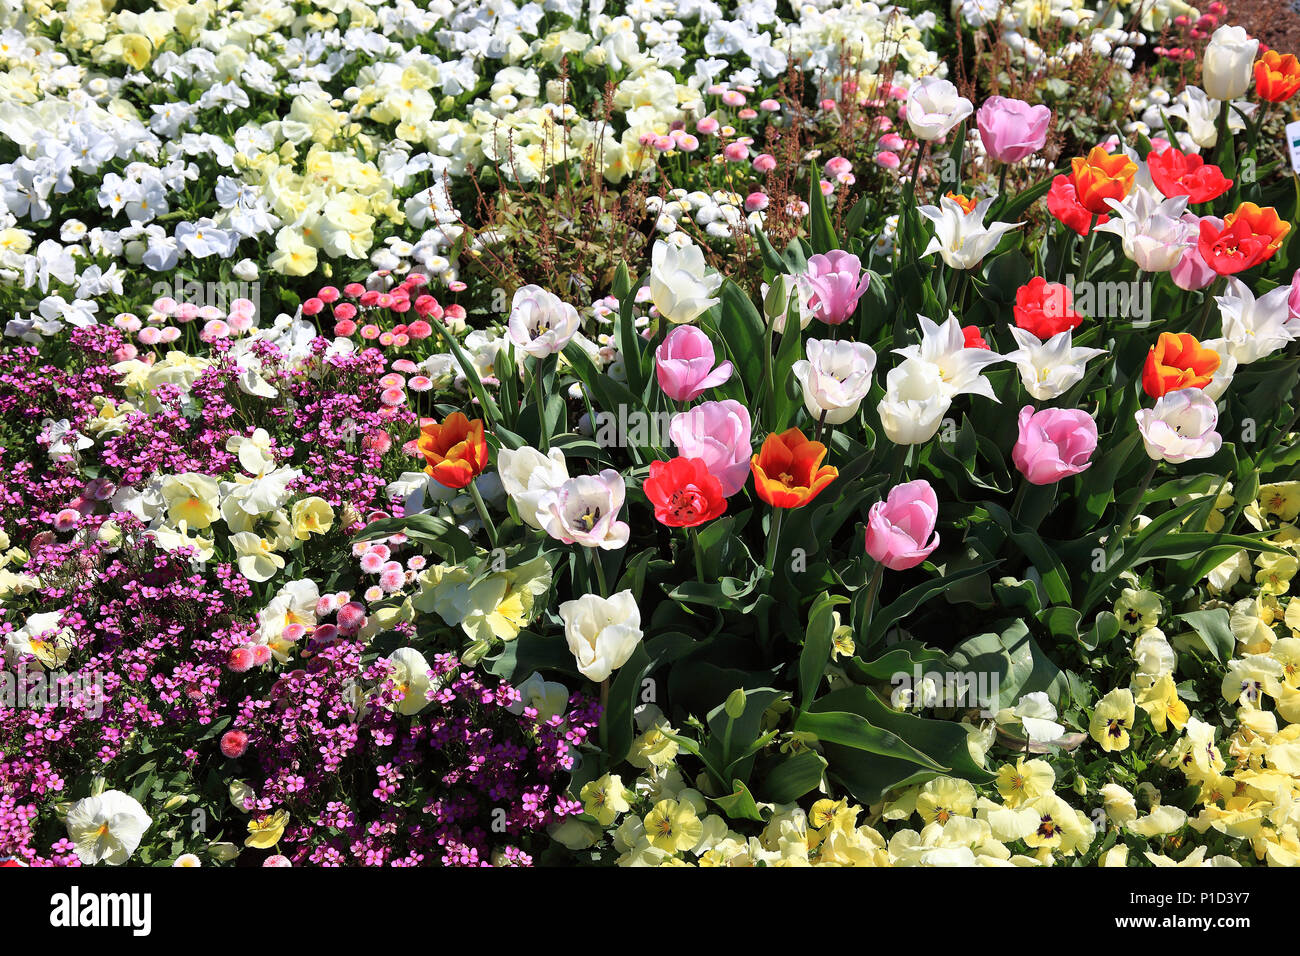 many colorful tulips in one area Stock Photo